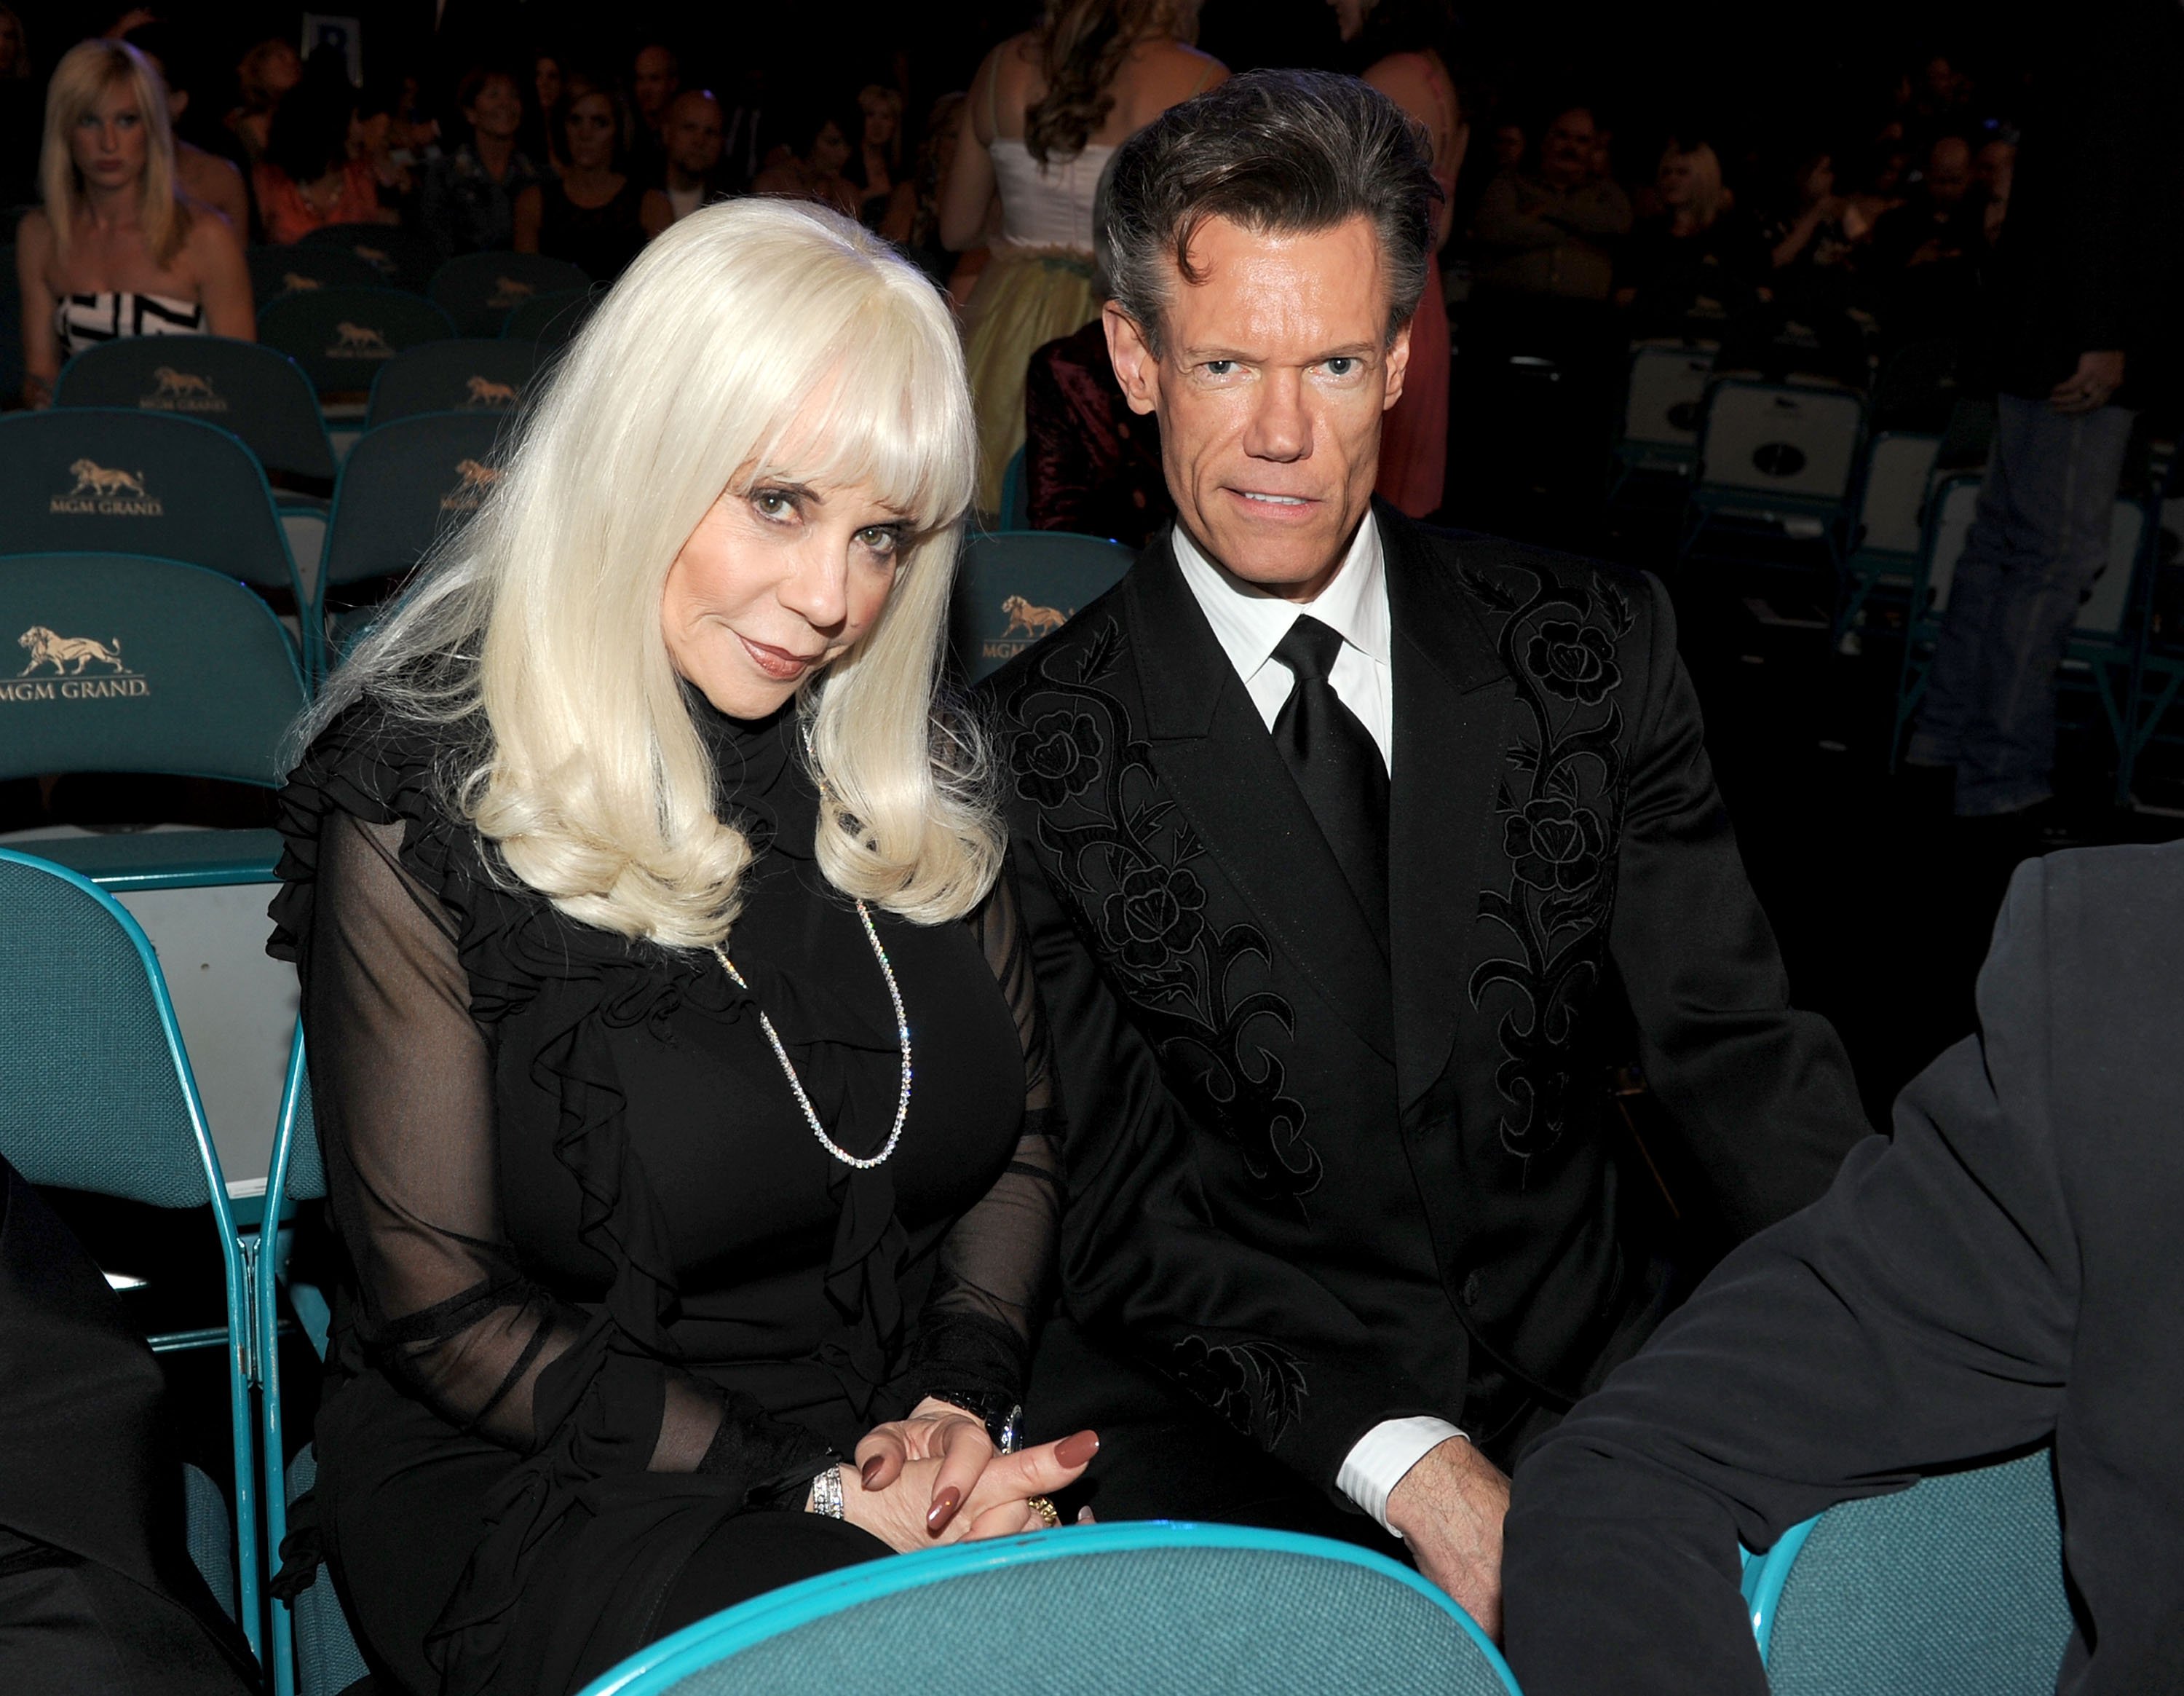 Musician Randy Travis (R) and wife Lib Hatcher Travis during the 45th Annual Academy of Country Music Awards at the MGM Grand Garden Arena on April 18, 2010 in Las Vegas, Nevada. | Source: Getty Images